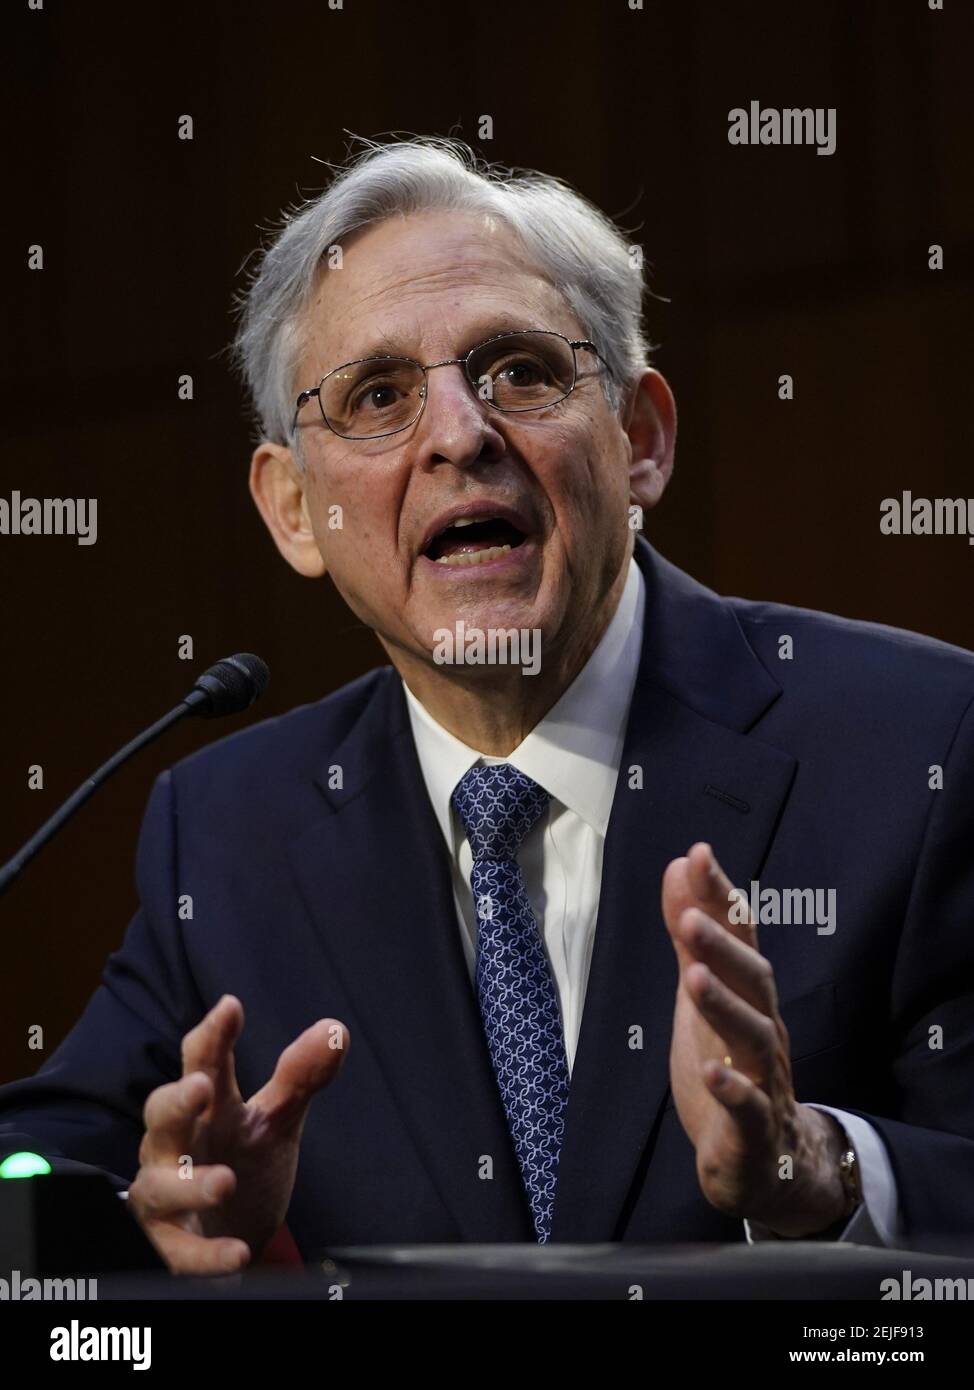 Washington, United States. 22nd Feb, 2021. Attorney General nominee Merrick Garland testifies during his confirmation hearing before the Senate Judiciary Committee in the Hart Senate Office Building on Capitol Hill in Washington, DC on February 22, 2021. Garland previously served at the Chief Judge for the U.S. Court of Appeals for the District of Columbia Circuit. Pool Photo by Drew Angerer/UPI Credit: UPI/Alamy Live News Stock Photo